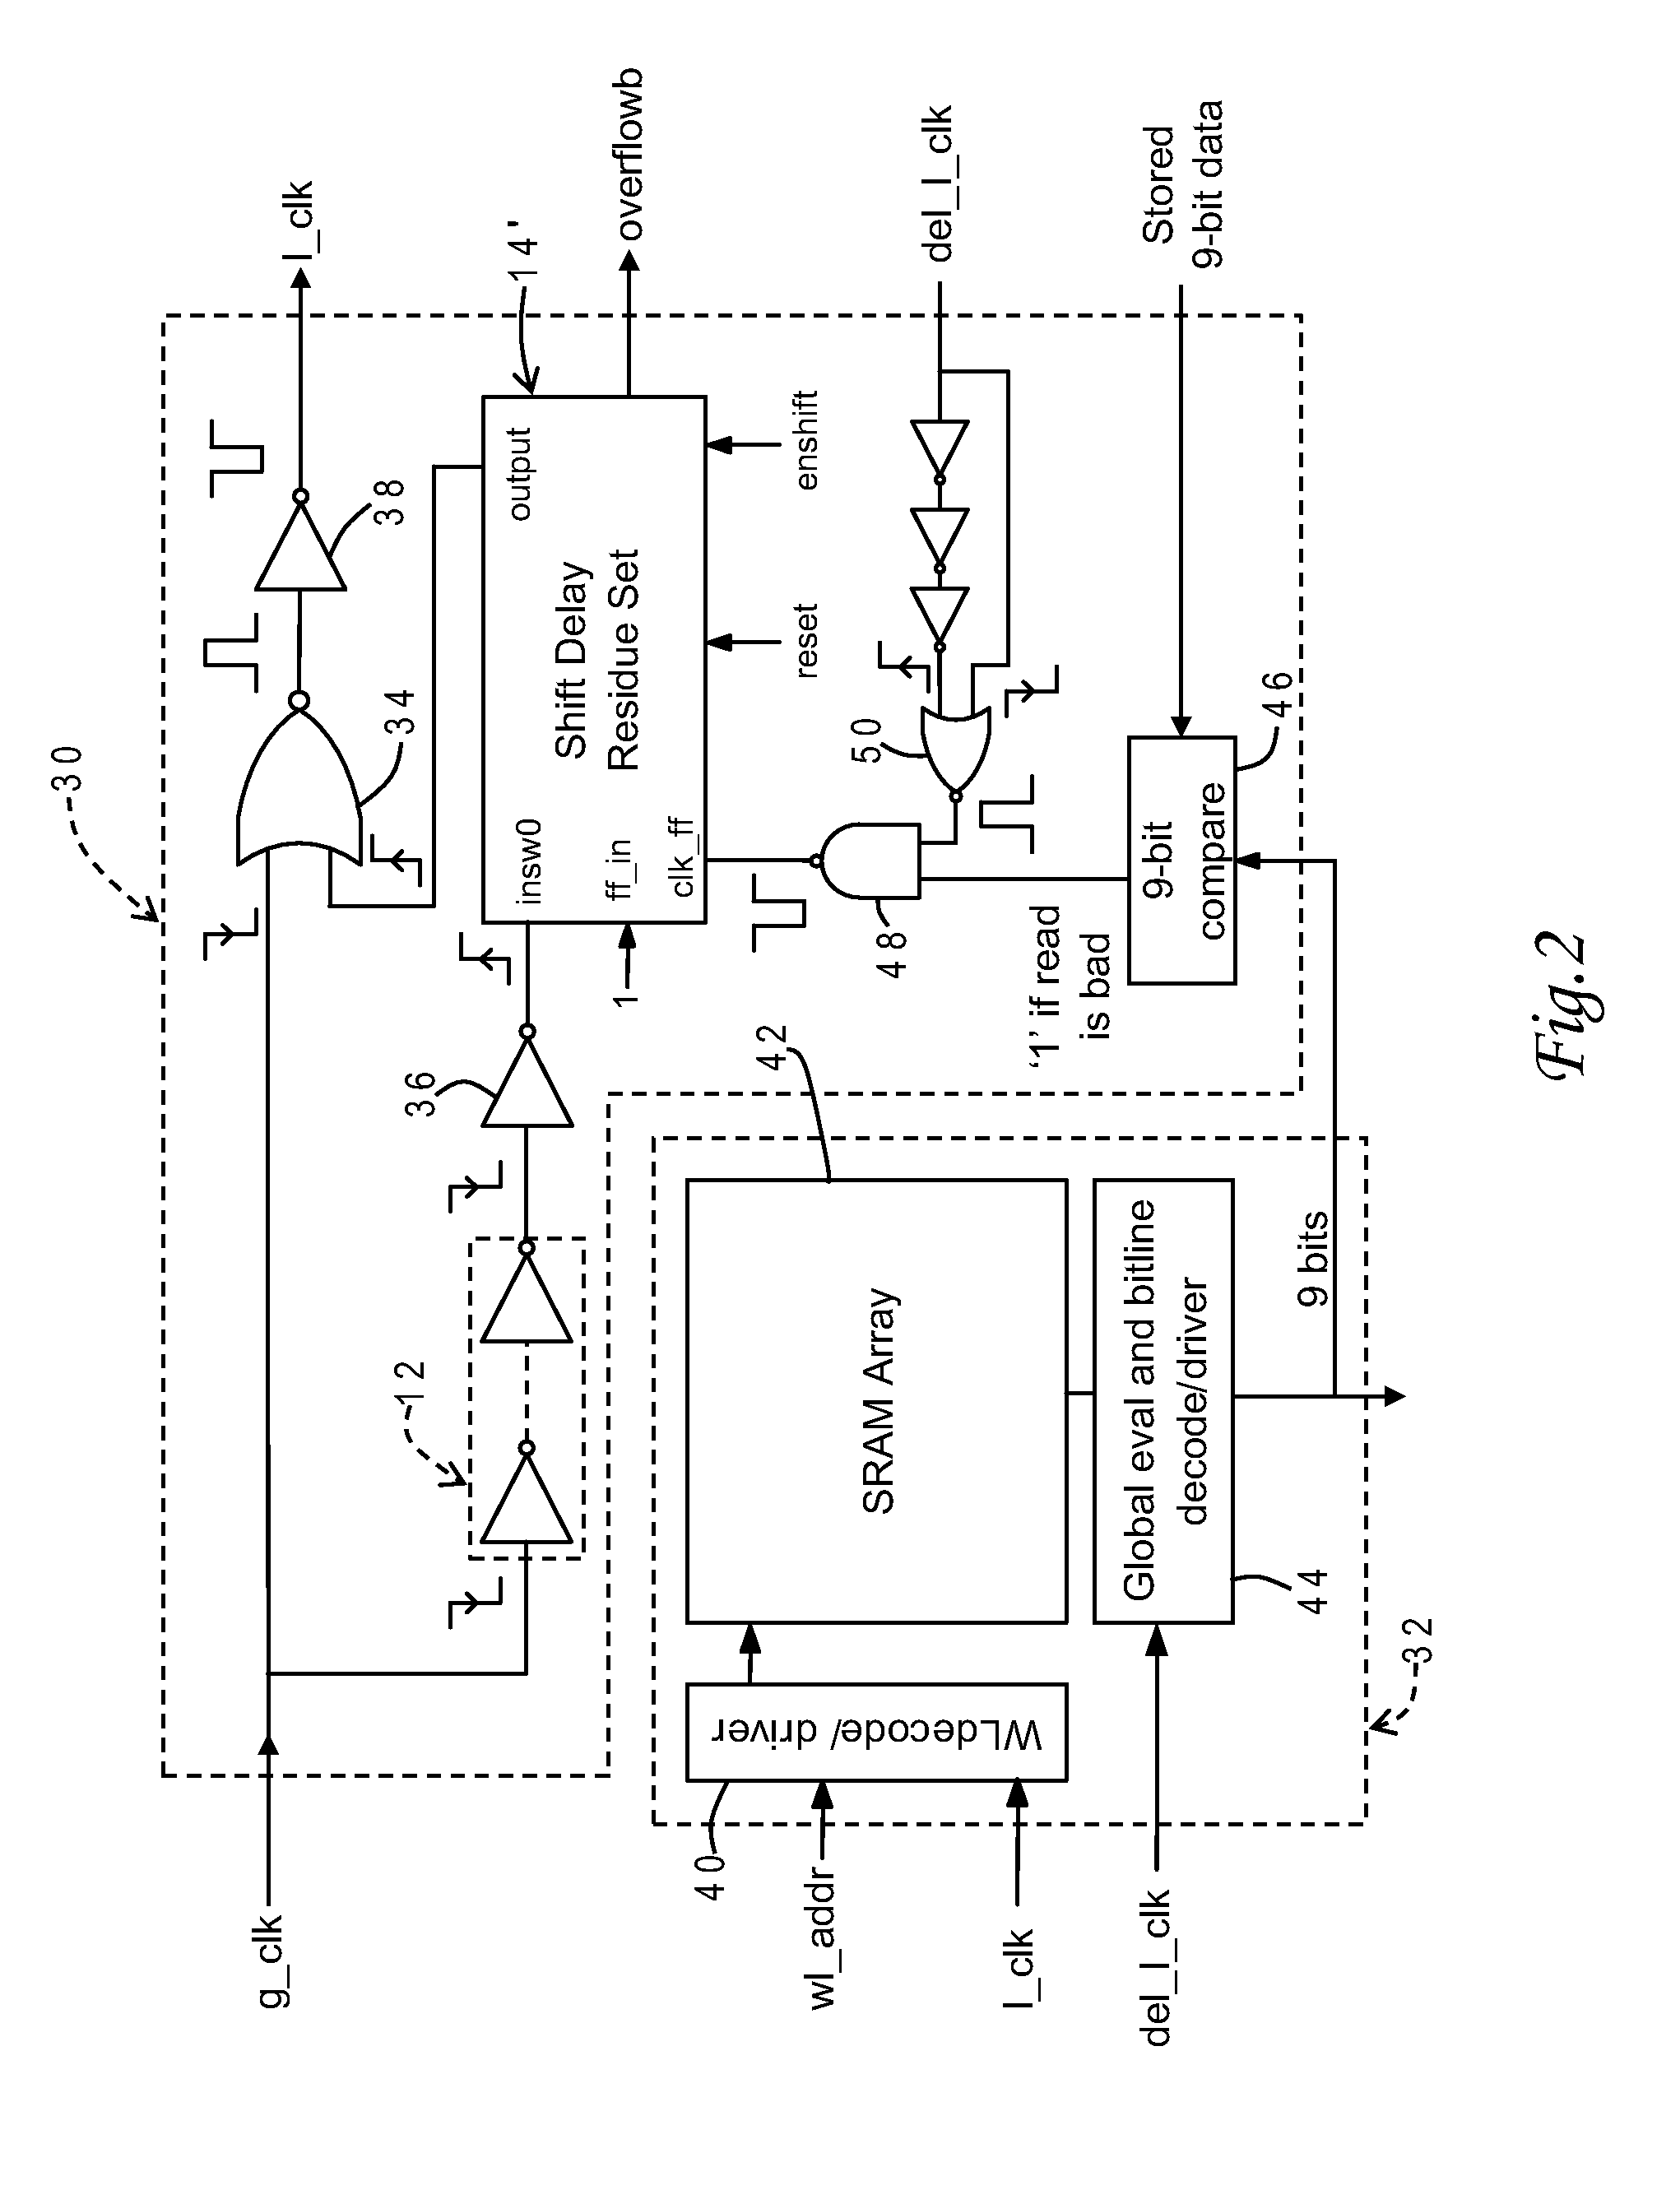 Optimizing Sram Performance over Extended Voltage or Process Range Using Self-Timed Calibration of Local Clock Generator